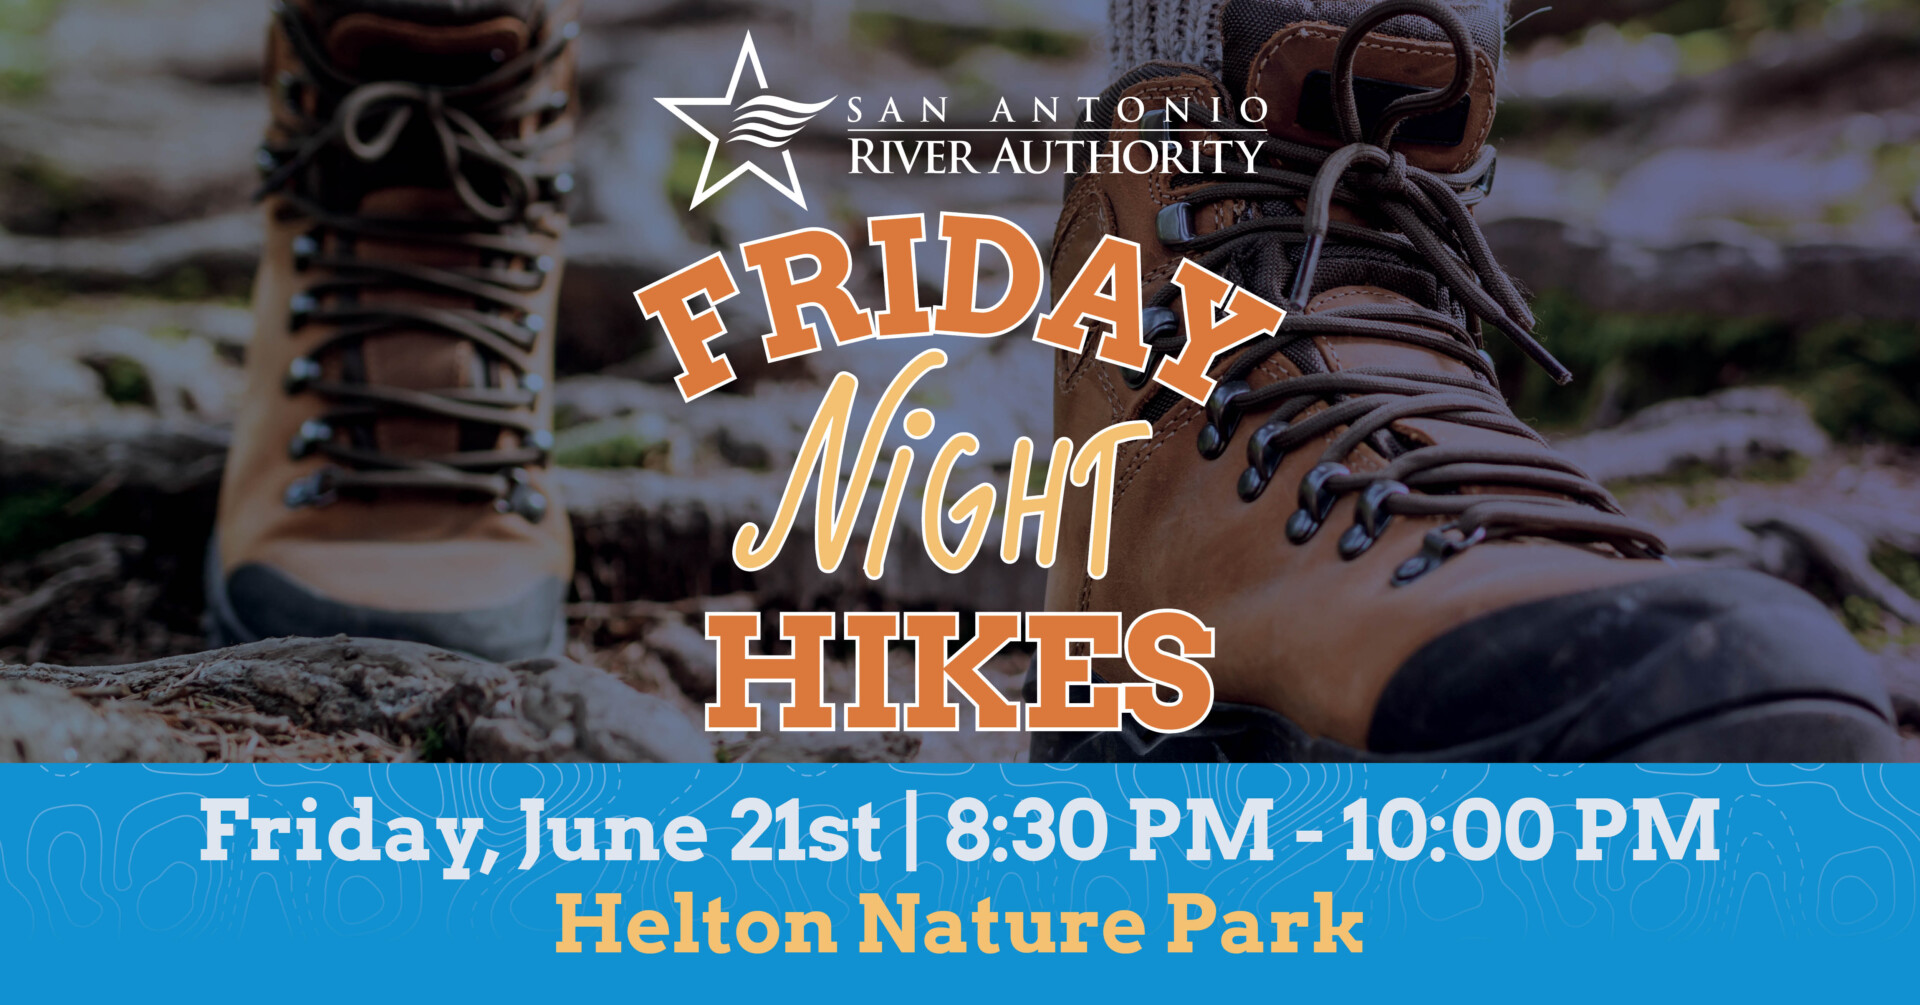 Friday Night Hikes - June 21 at Helton Nature Park